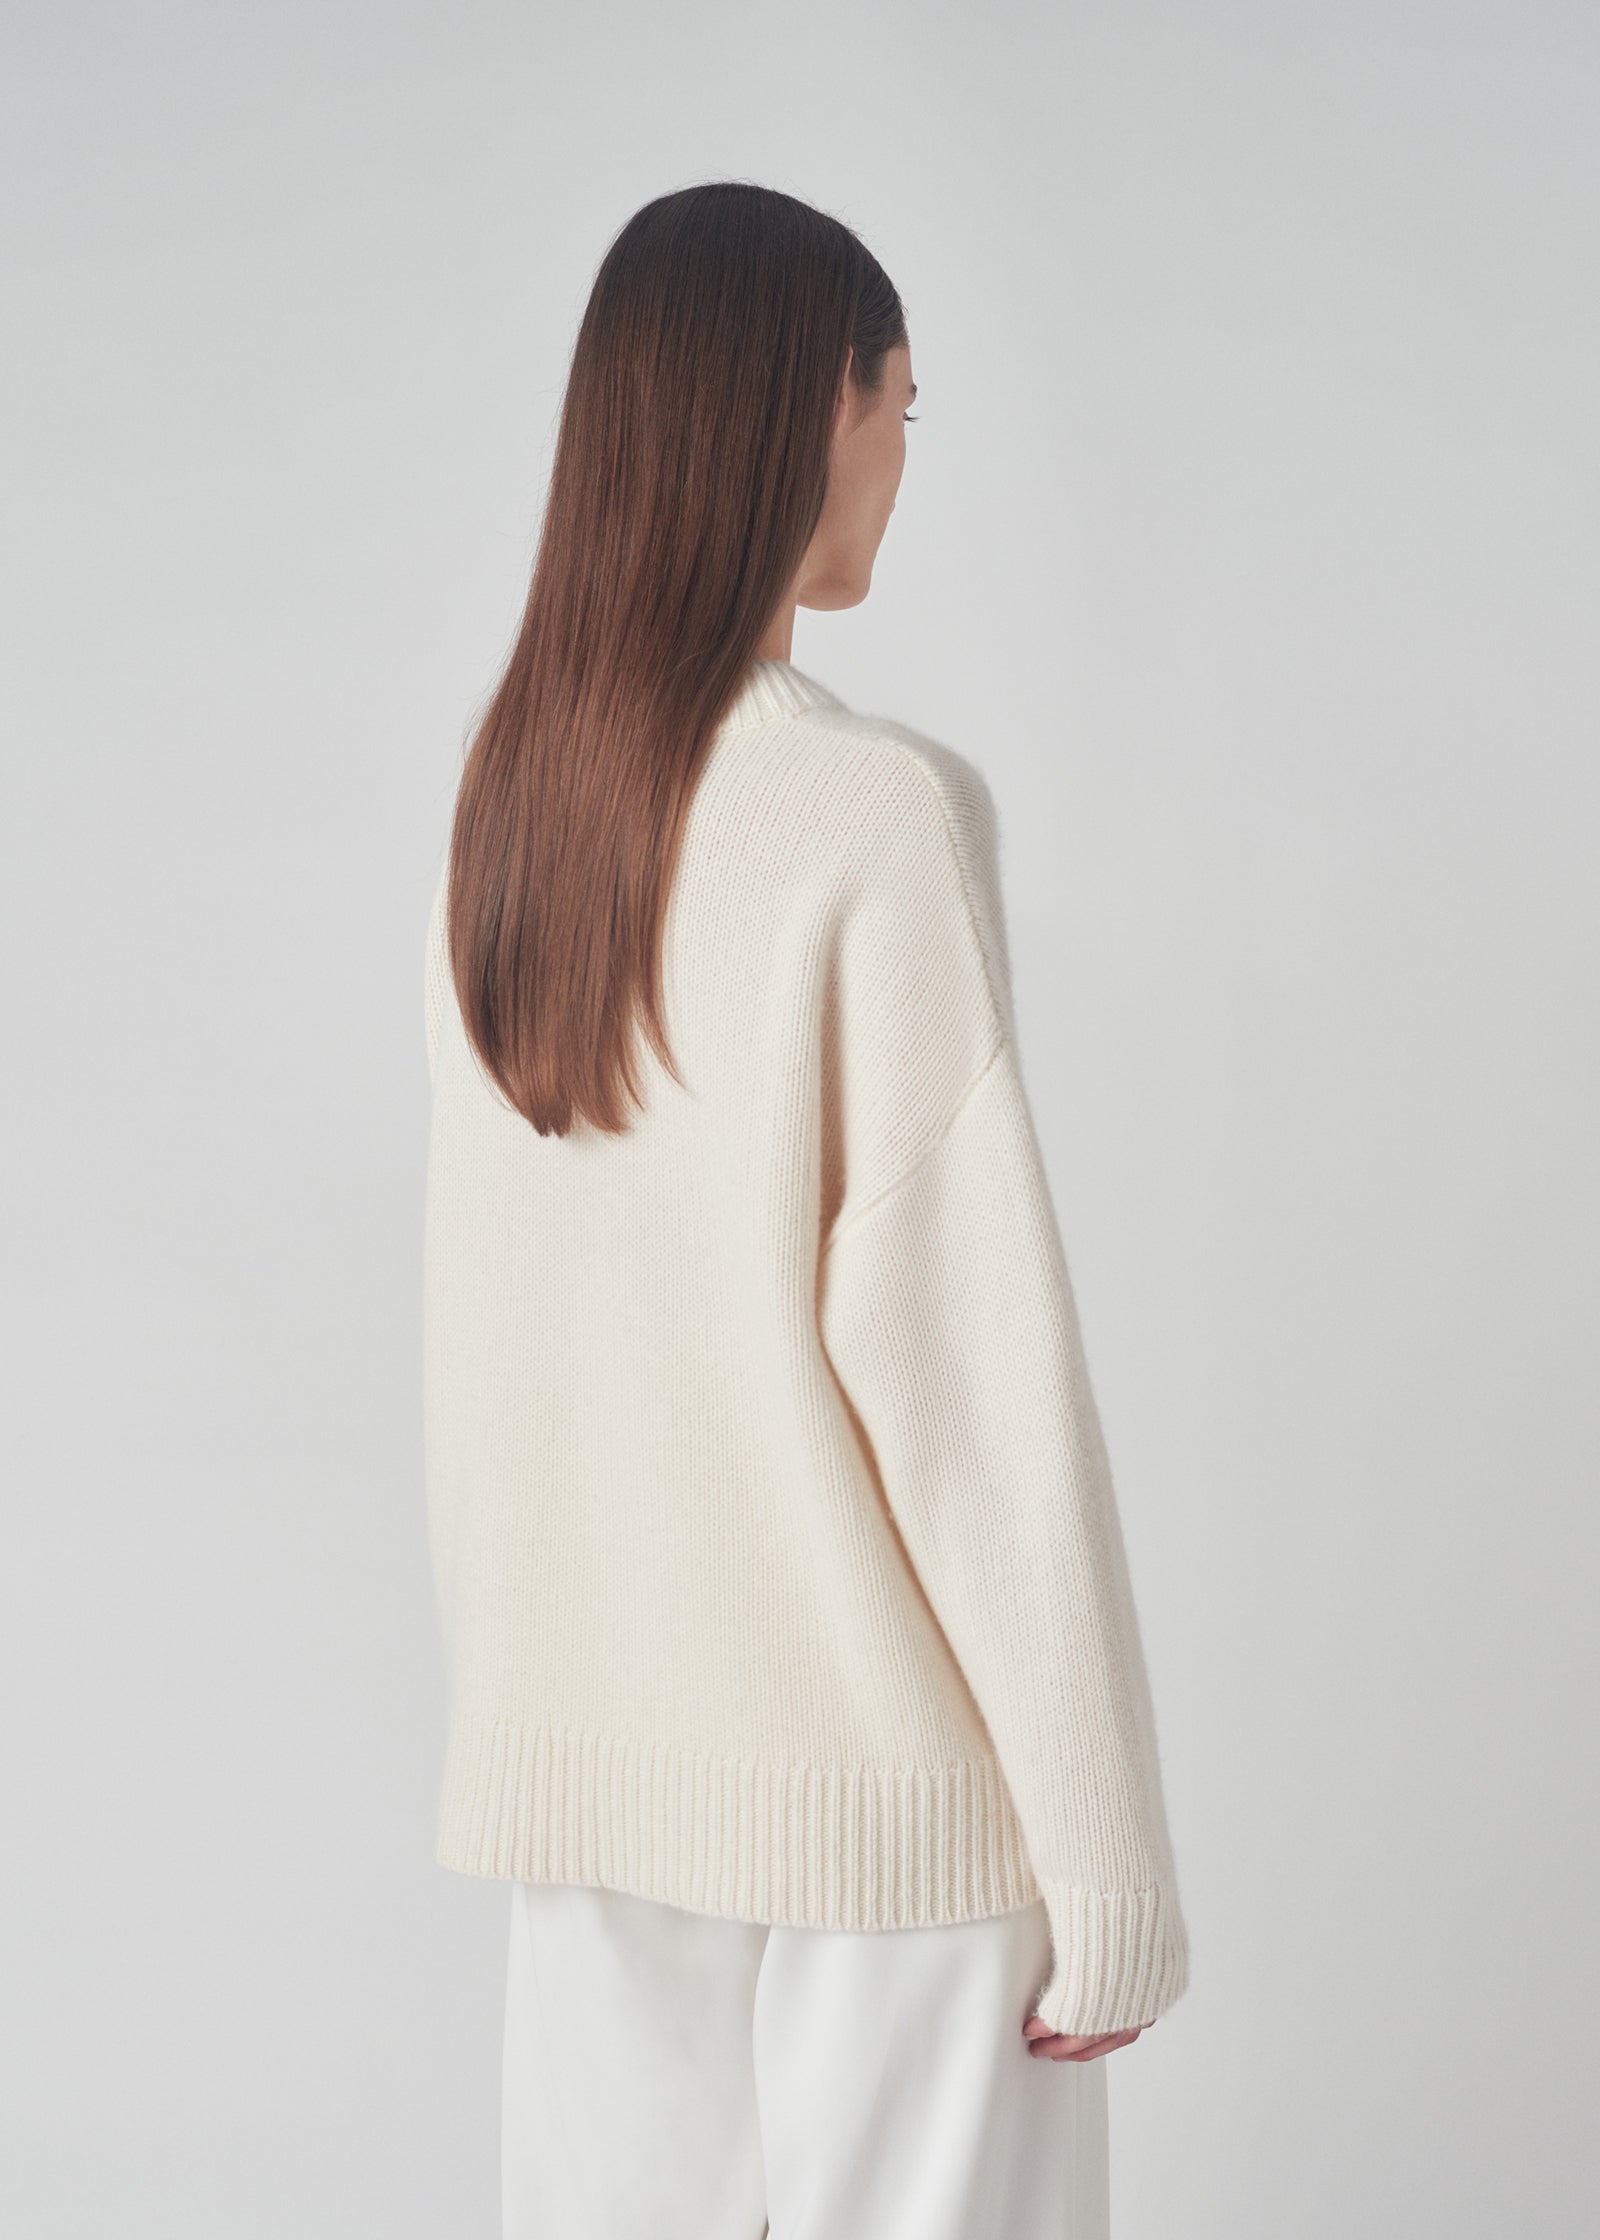 Boyfriend Sweater in Cashmere - Ivory - CO Collections